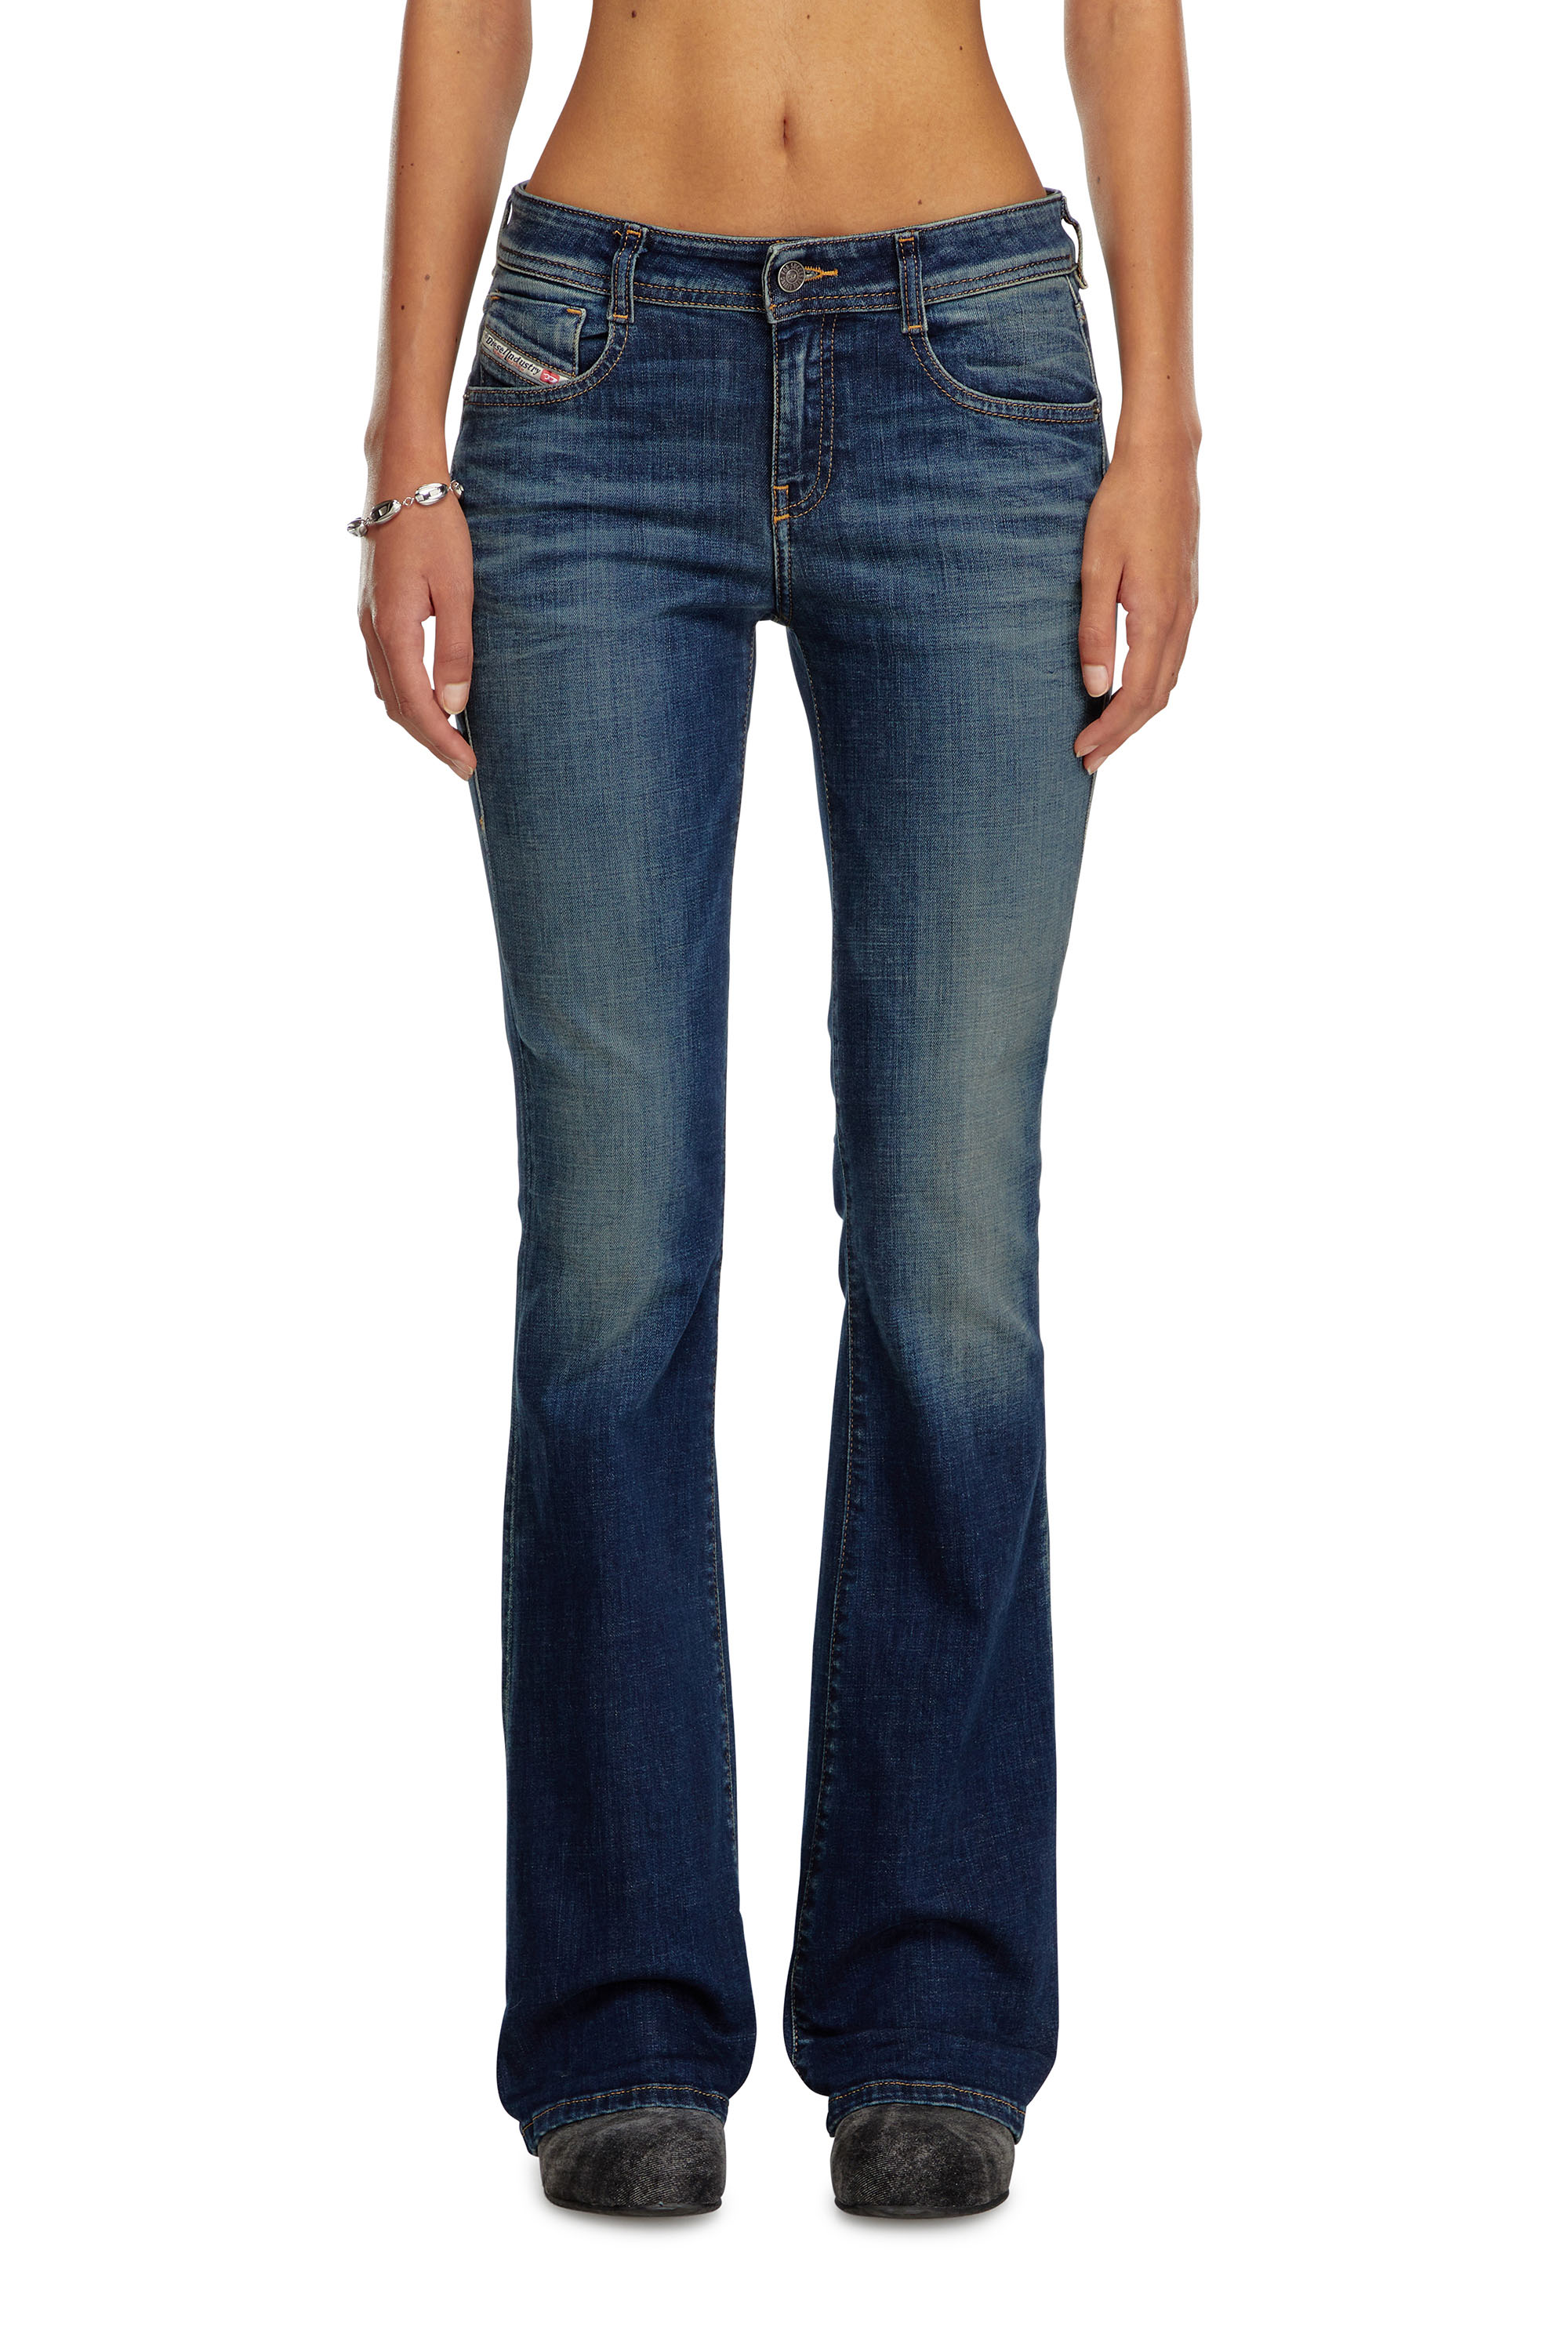 Diesel - Bootcut and Flare Jeans 1969 D-Ebbey 09J20, Mujer Bootcut y Flare Jeans - 1969 D-Ebbey in Azul marino - Image 1